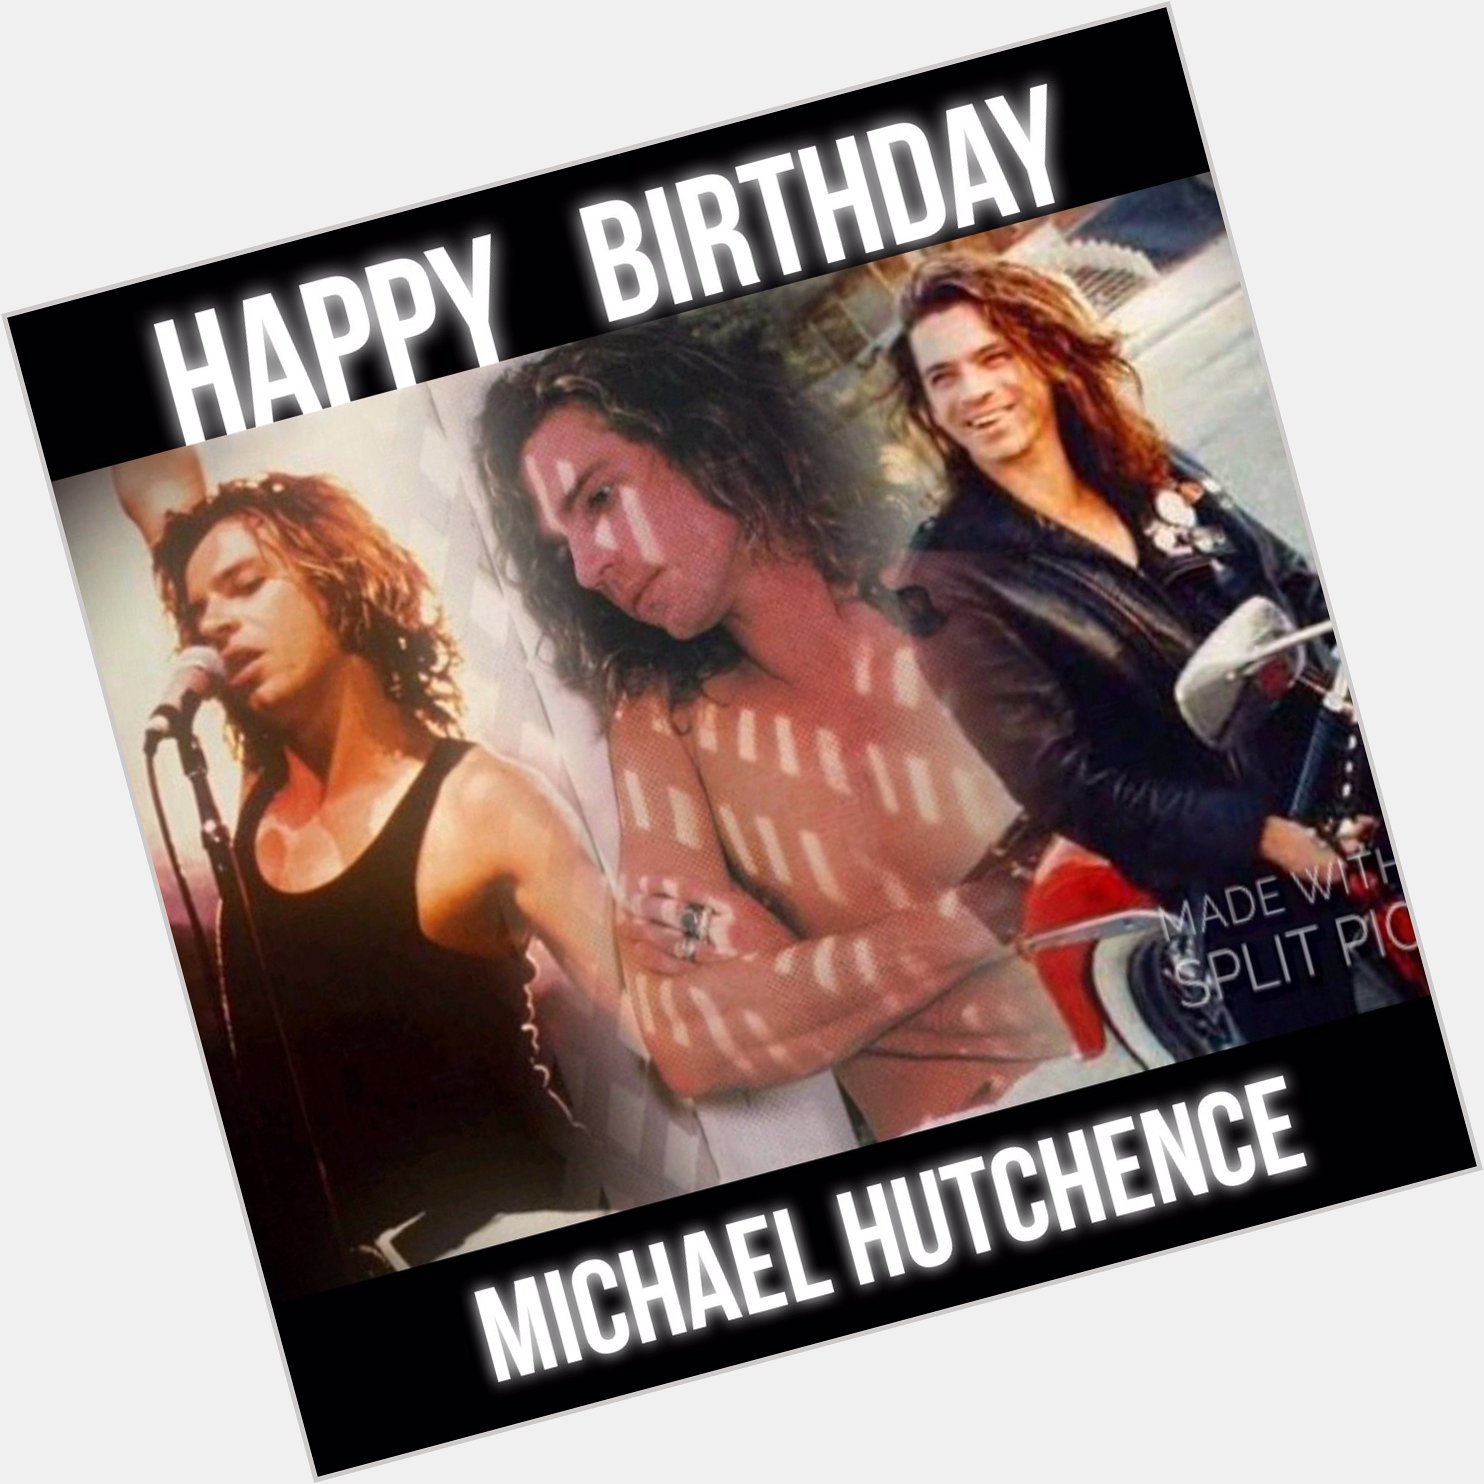 Happy Birthday Michael Hutchence wish you were still here you are missed every day 